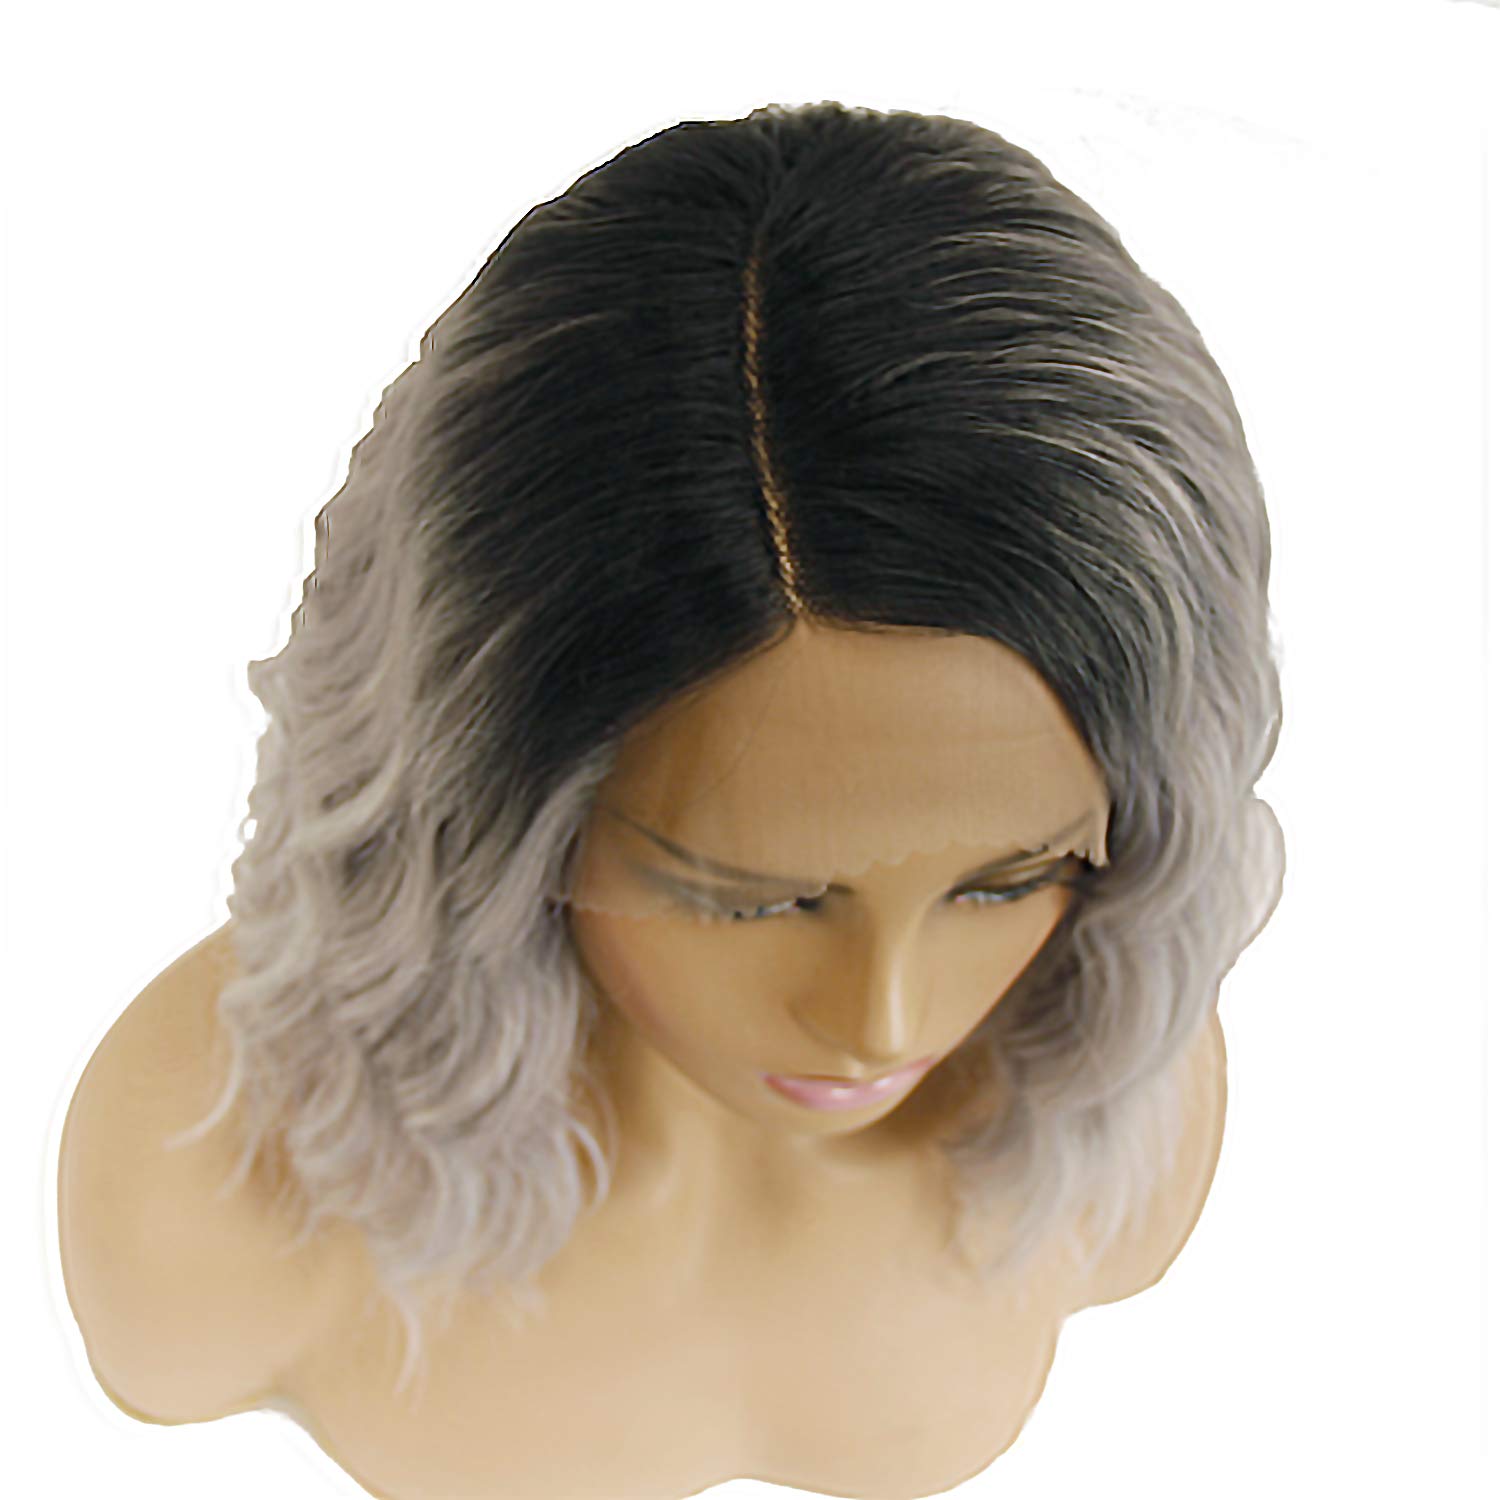 Dark Roots Ombre Lace Front Synthetic Wigs for Women, L Right Side Part 2 Tone Black to Gray Natural Hairline Hair Replacement Daily Wig-1